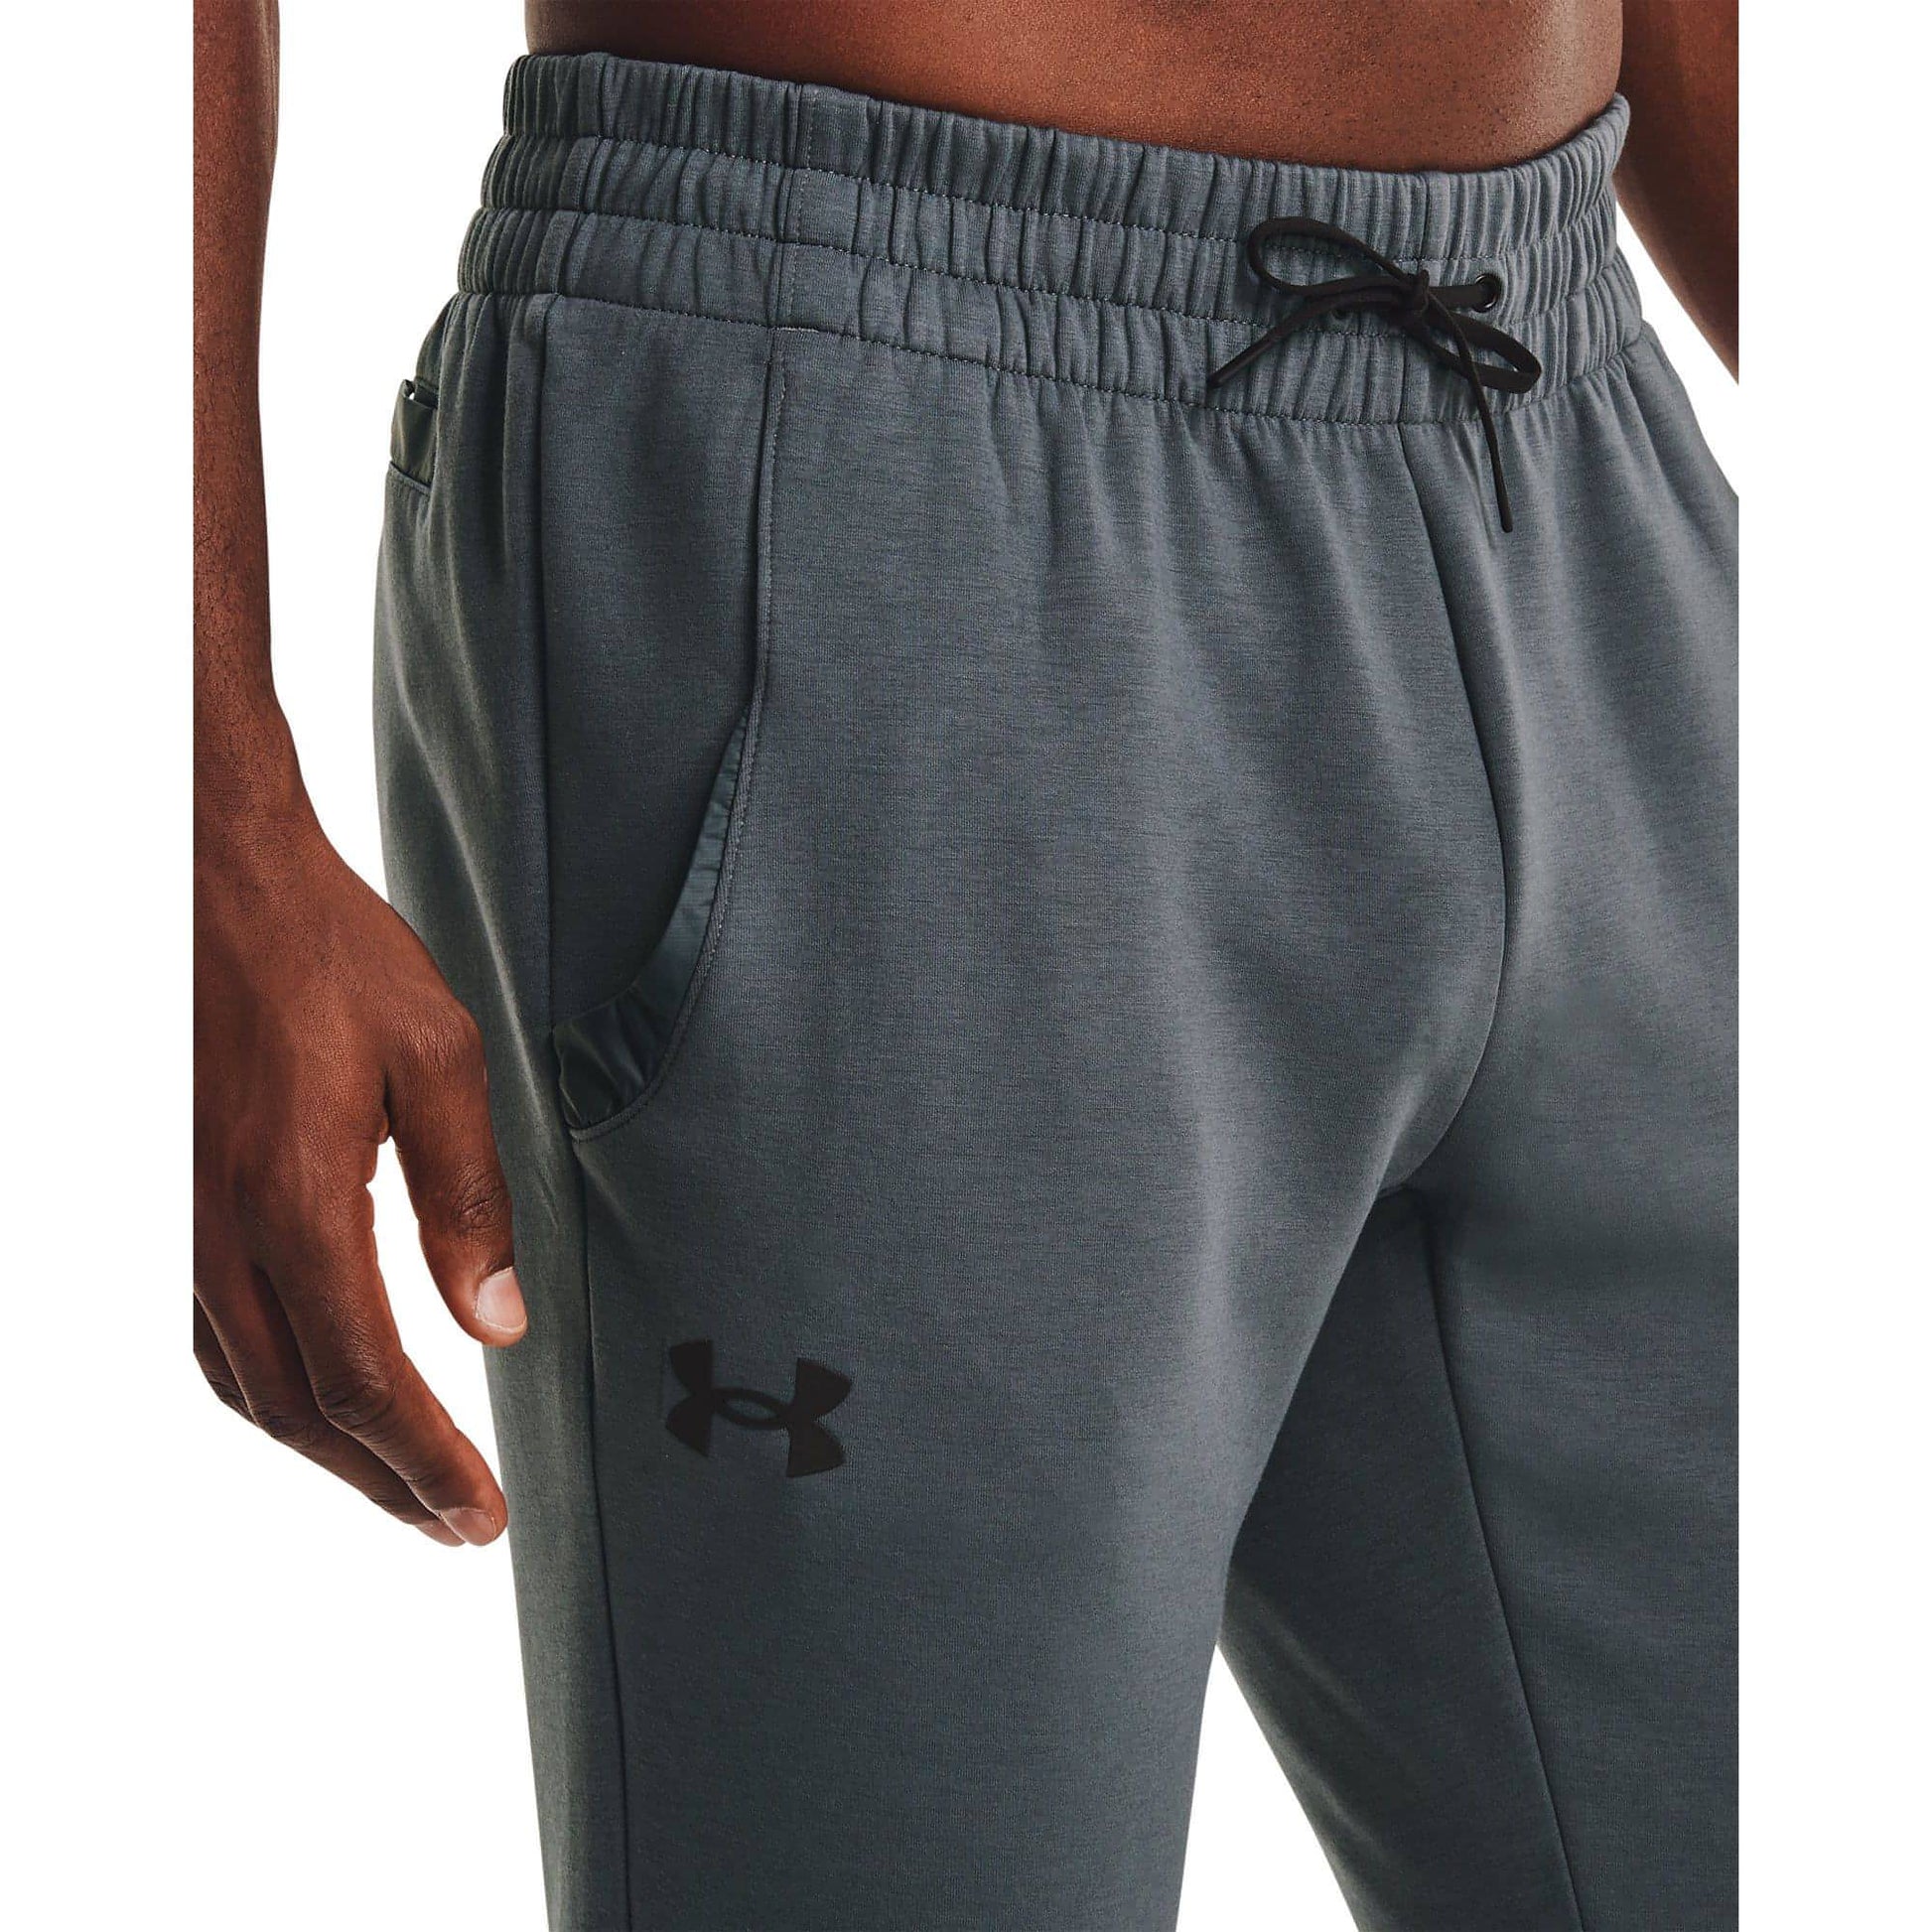 Under Armour Summit Knit Joggers Details